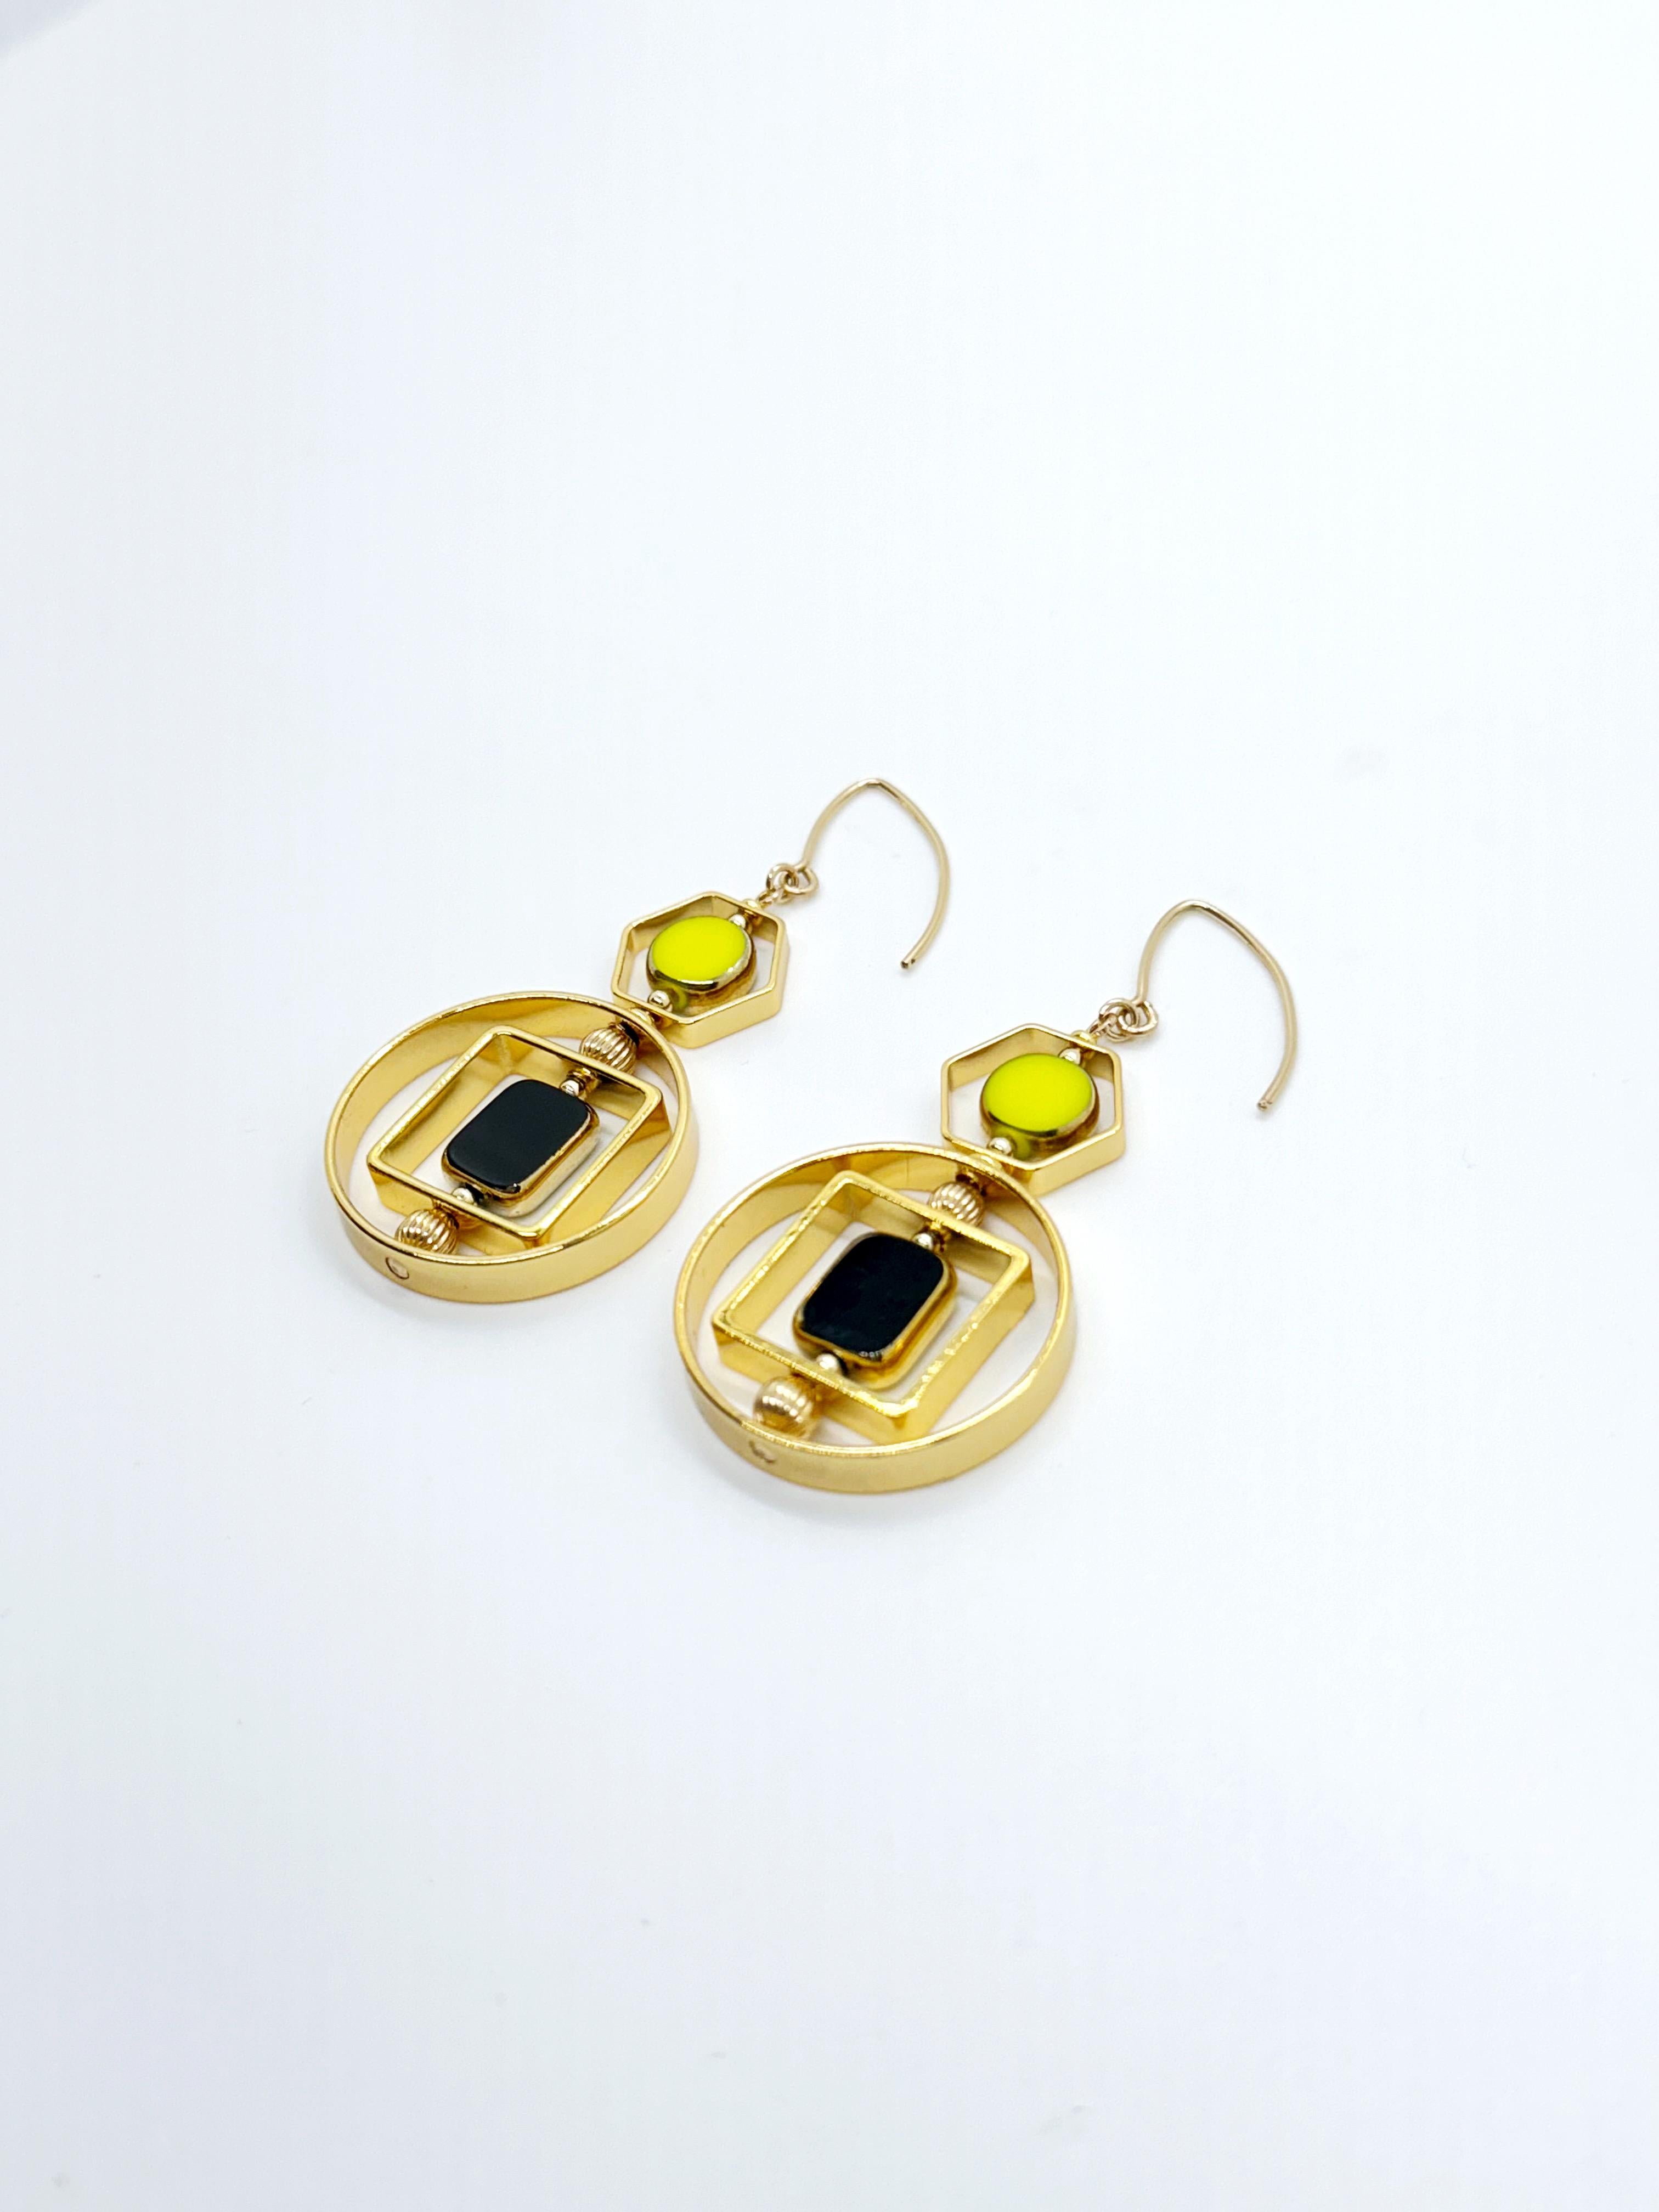 The earrings are lightweight and are made to rotate and reposition with movement.

The earrings consists of black and chartreuse new old stock vintage German glass beads framed with 24K gold. The beads were hand-pressed during the 1920s-1960s in